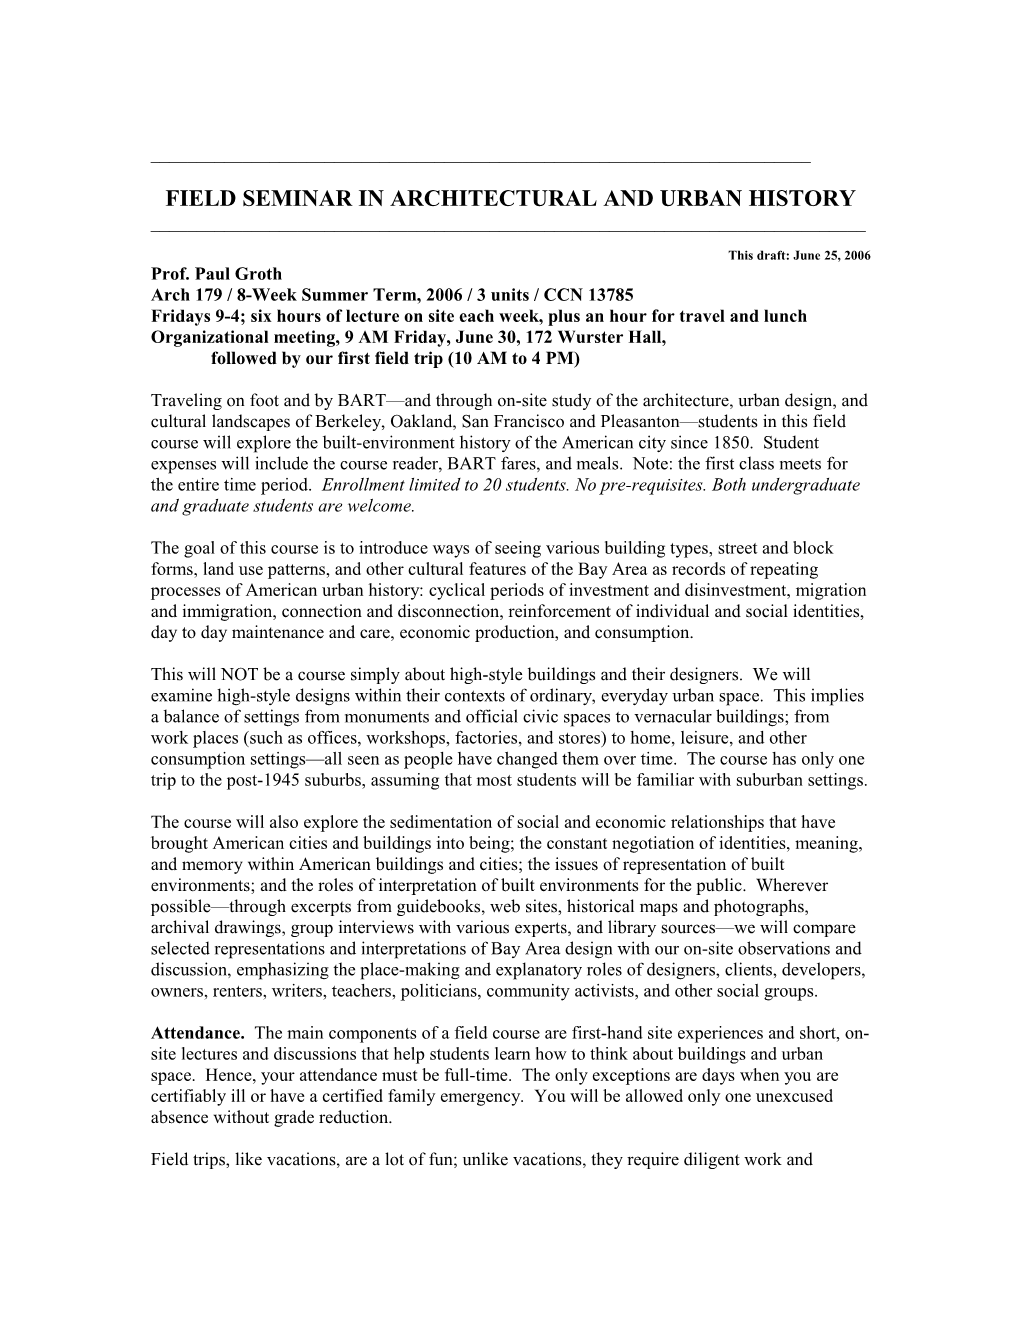 Field Seminar in Architectural and Urban History